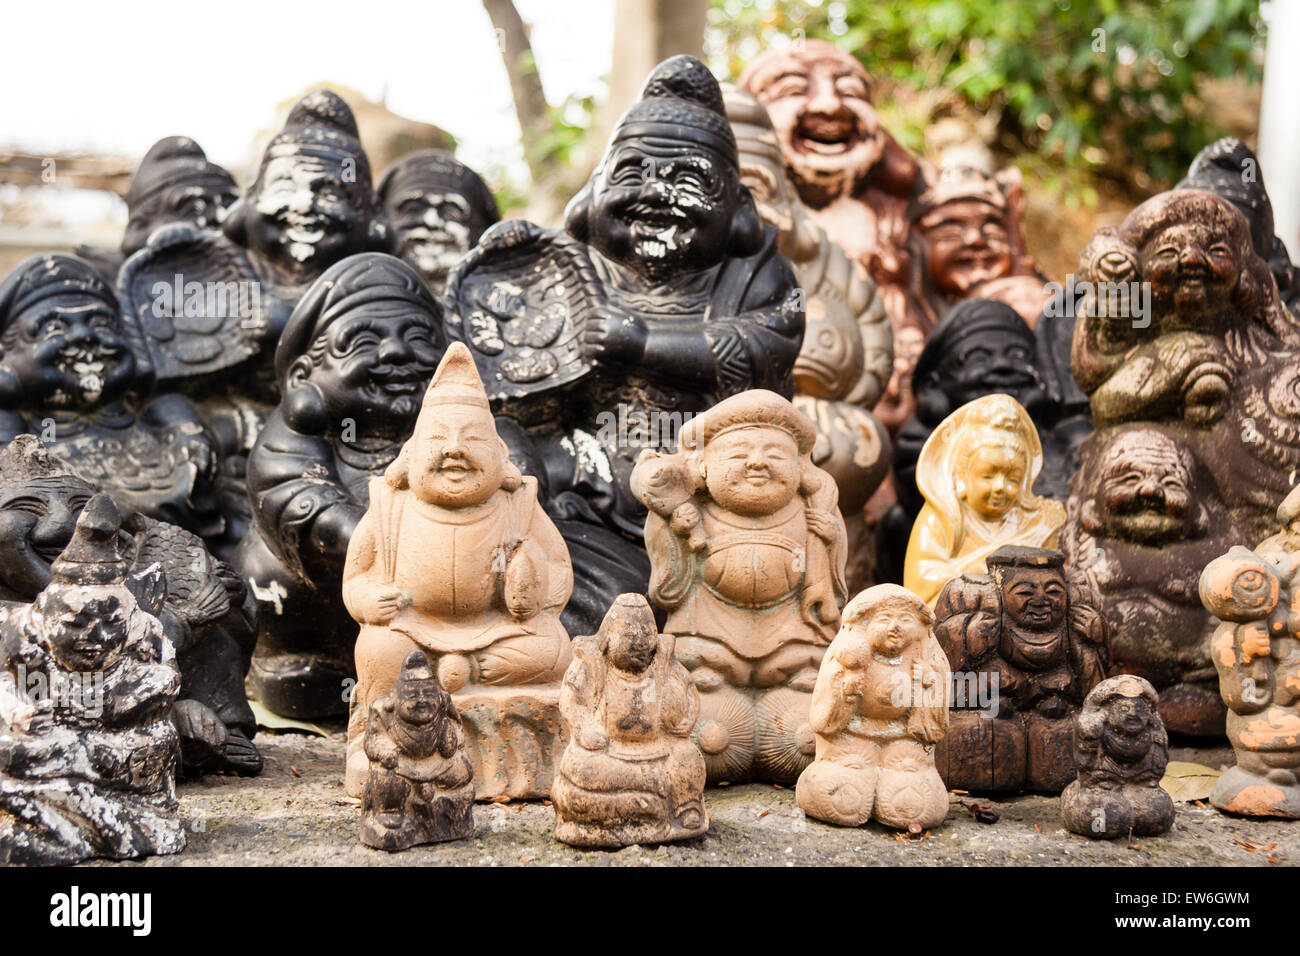 Japan, Kurashiki. Achi-jinja. Small statues of Shichifukujin, some of the the Japanese seven gods of happiness and good fortune arranged in group. Stock Photo